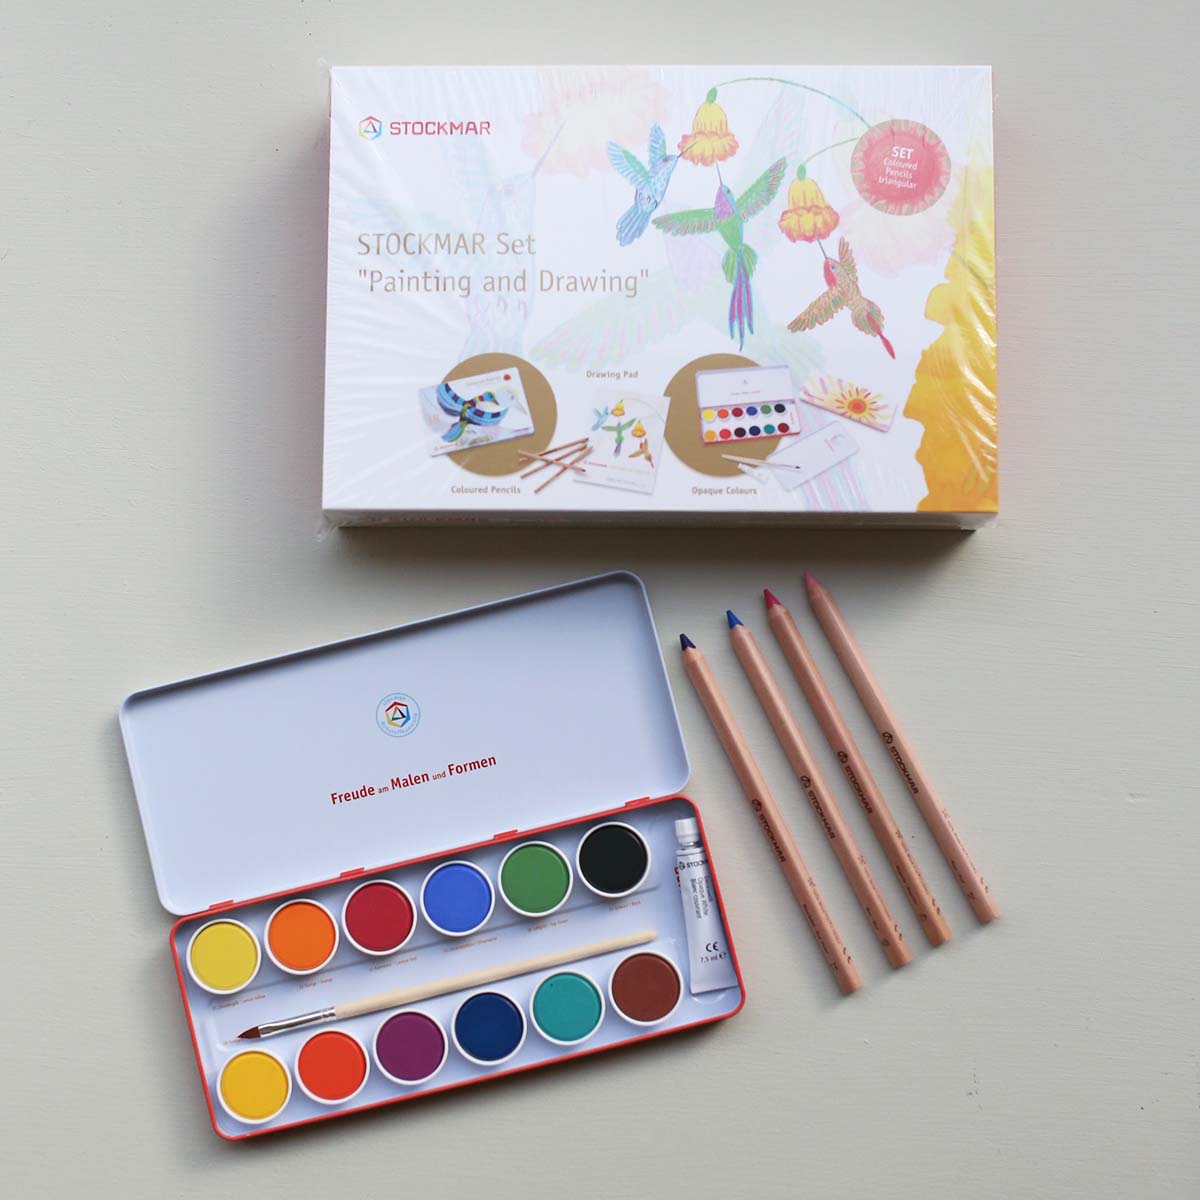 Stockmar Painting and Drawing Set– Odin Parker